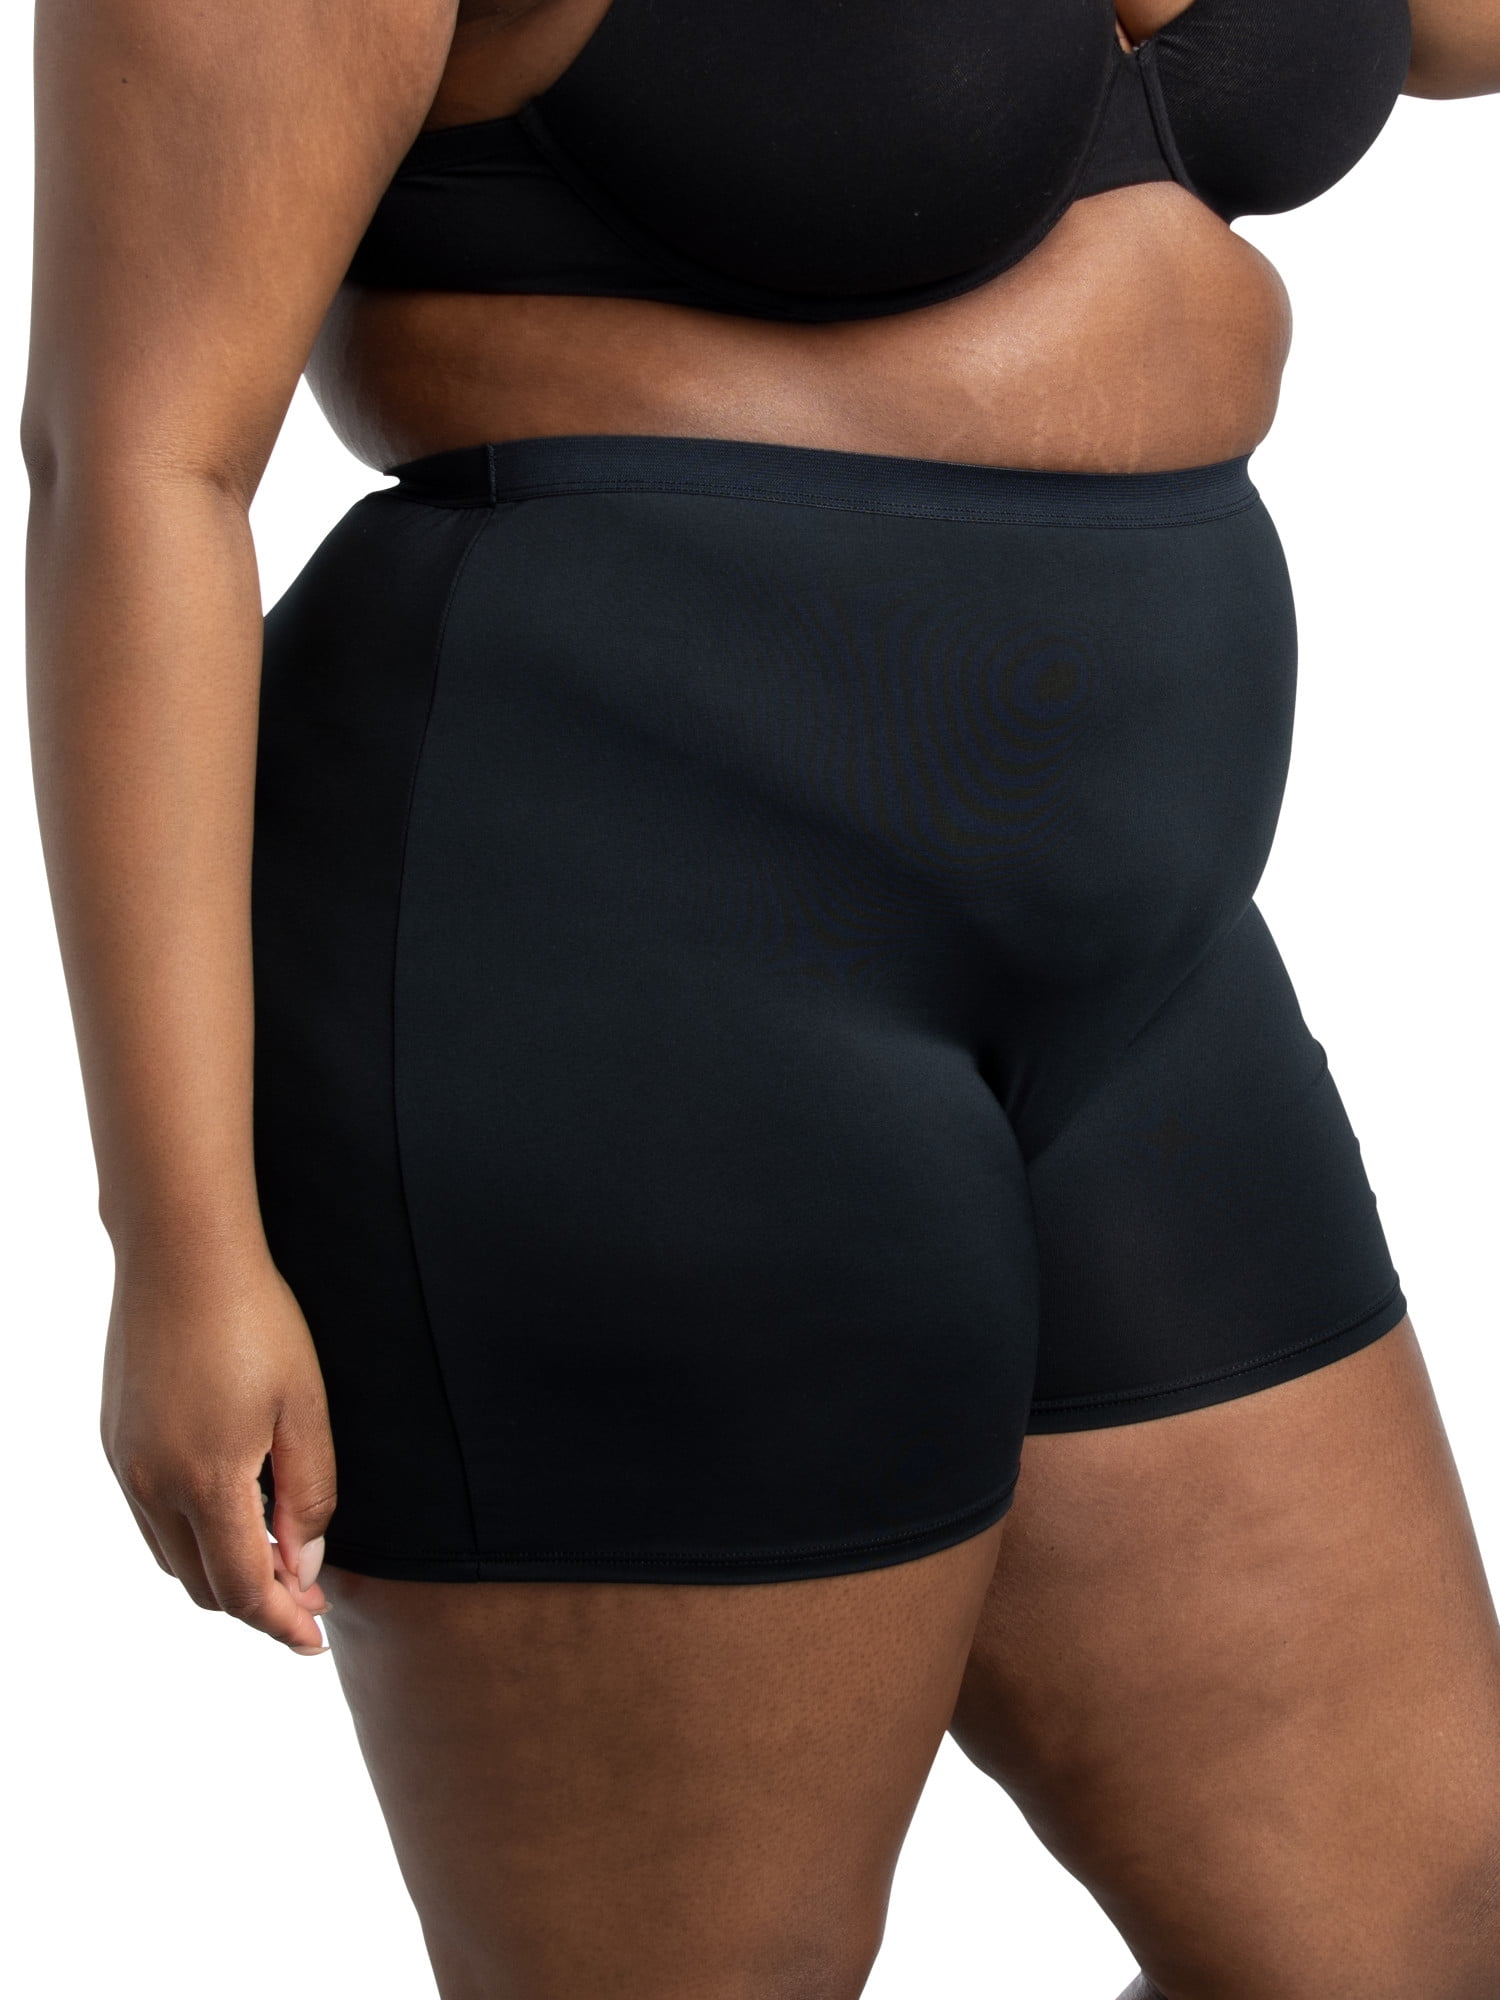 Fit for Me by Fruit of the Loom Women's Plus Size Microfiber Slip Short  Underwear, 4 Pack